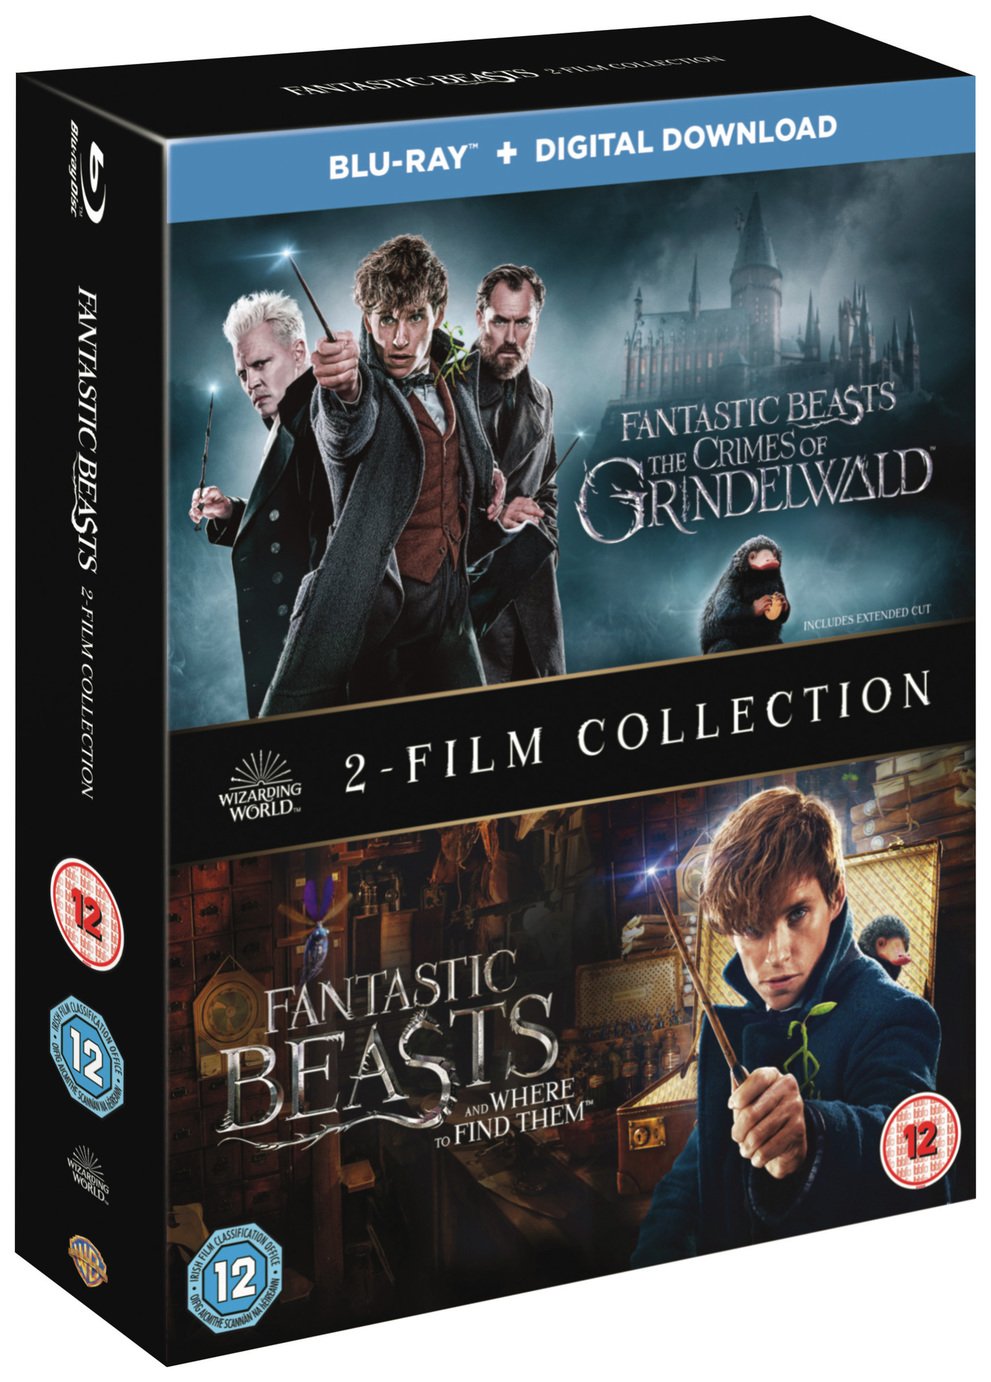 Fantastic Beasts Double Pack Blu-Ray Box Set Review